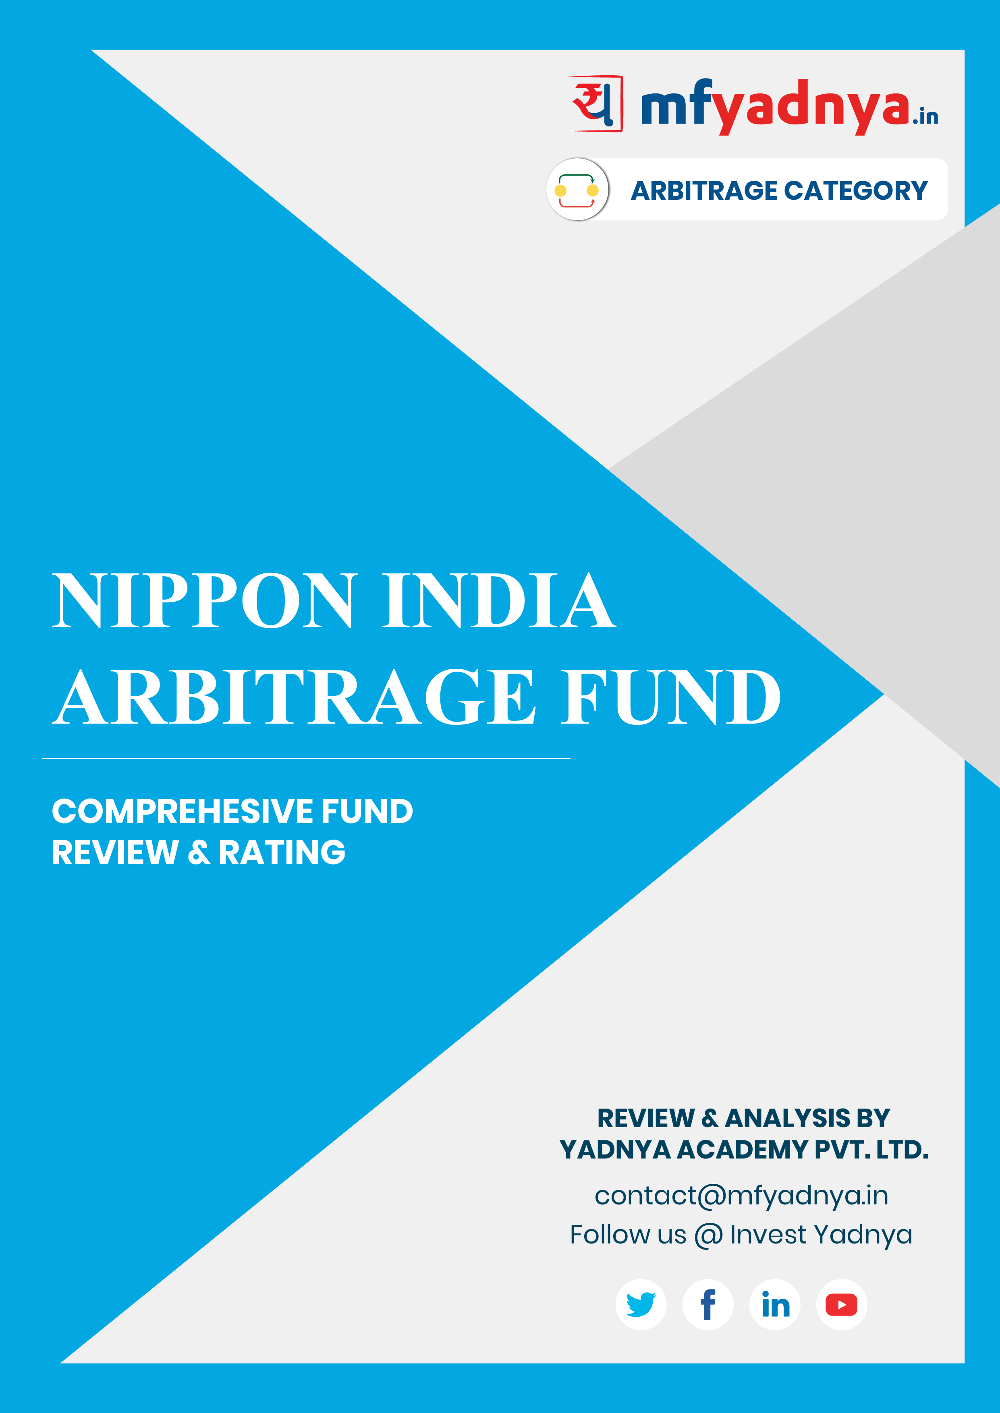 This e-book offers a comprehensive mutual fund review of Nippon India Arbitrage Fund. It reviews the fund's return, ratio, allocation etc. ✔ Detailed Mutual Fund Analysis ✔ Latest Research Reports